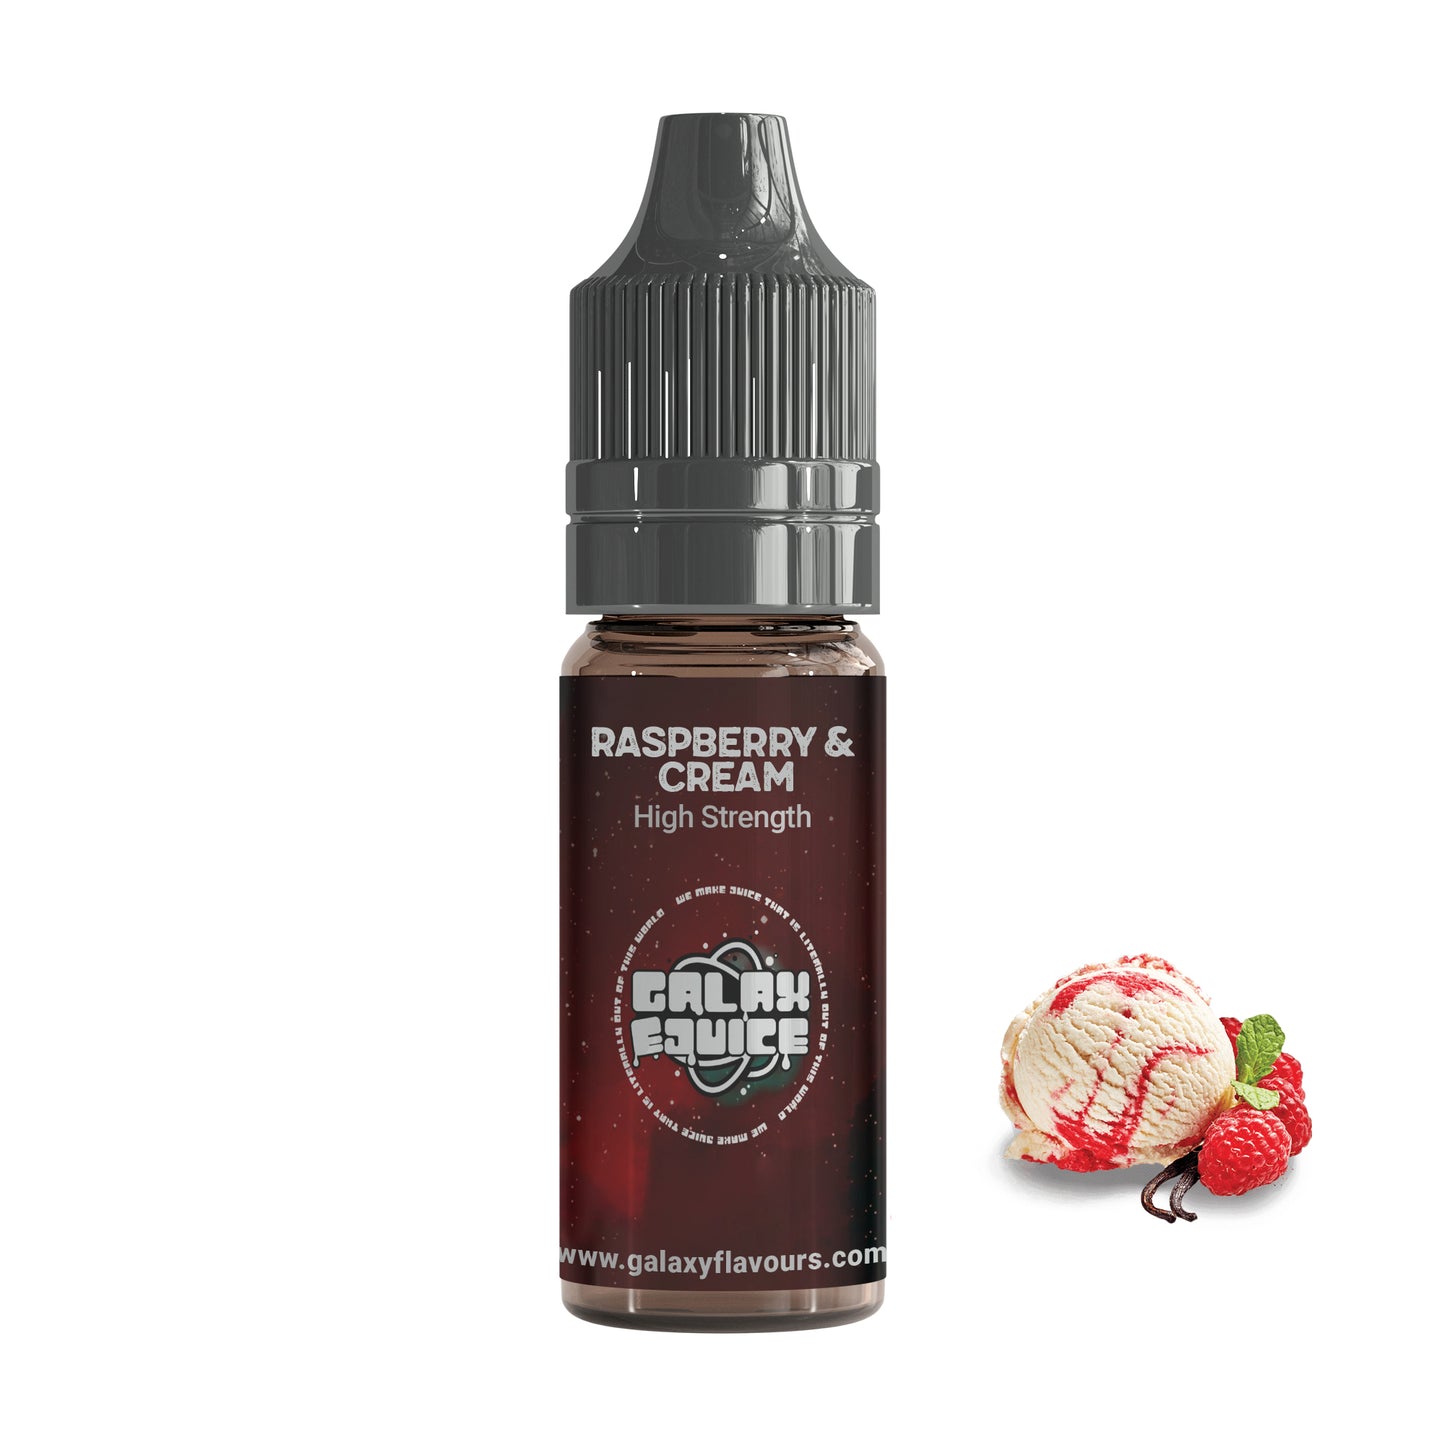 Raspberry and Cream High Strength Professional Flavouring.